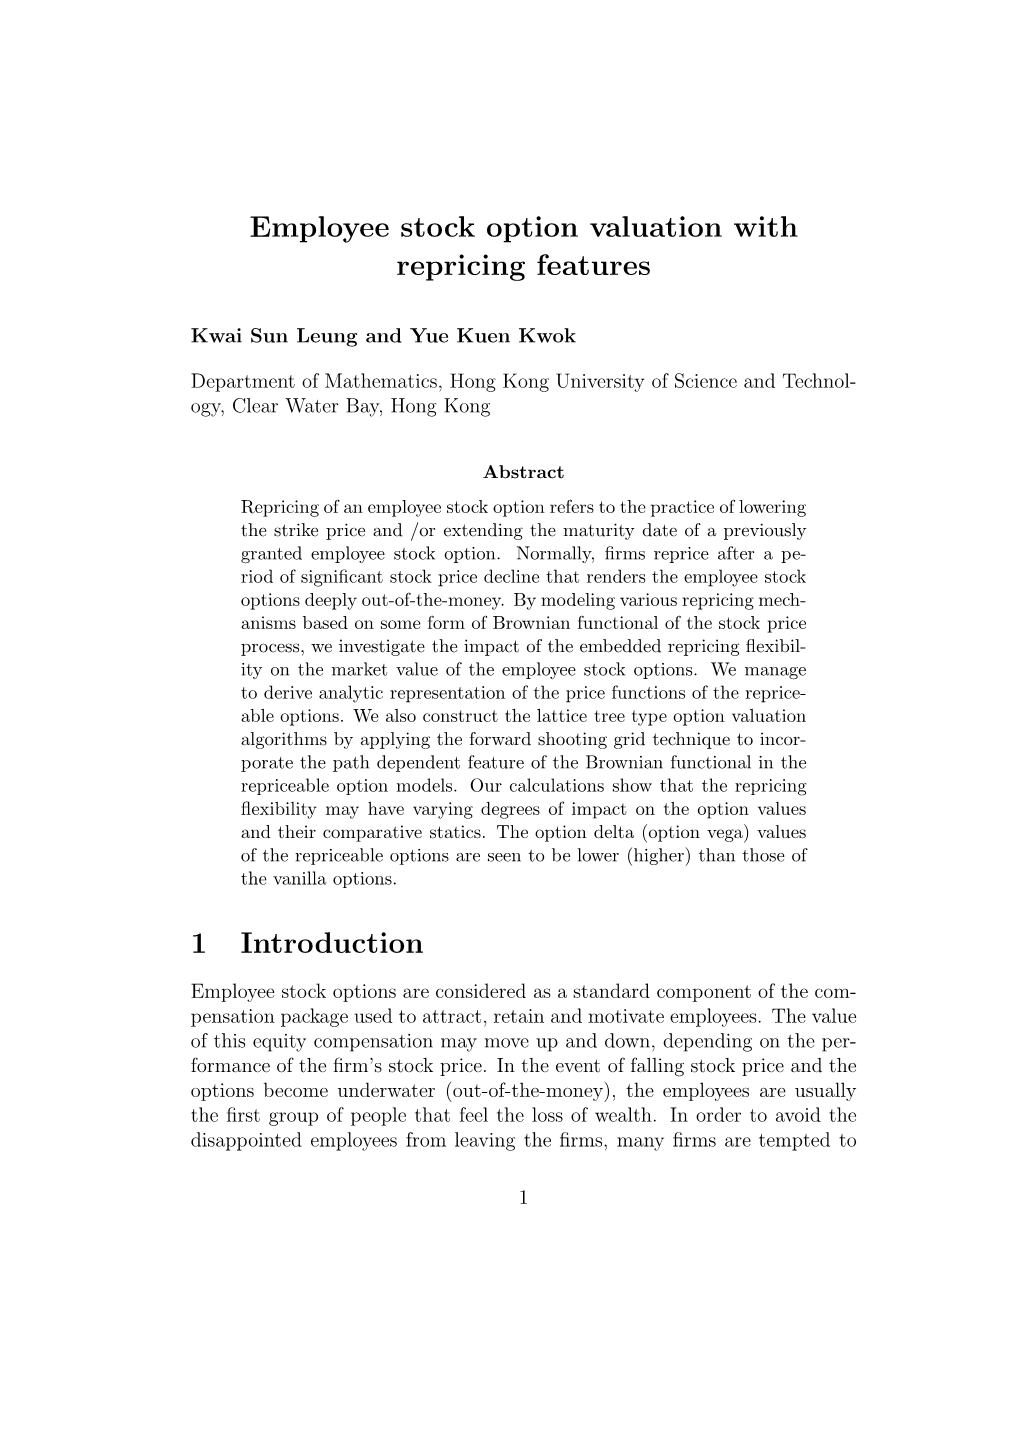 Employee Stock Option Valuation with Repricing Features